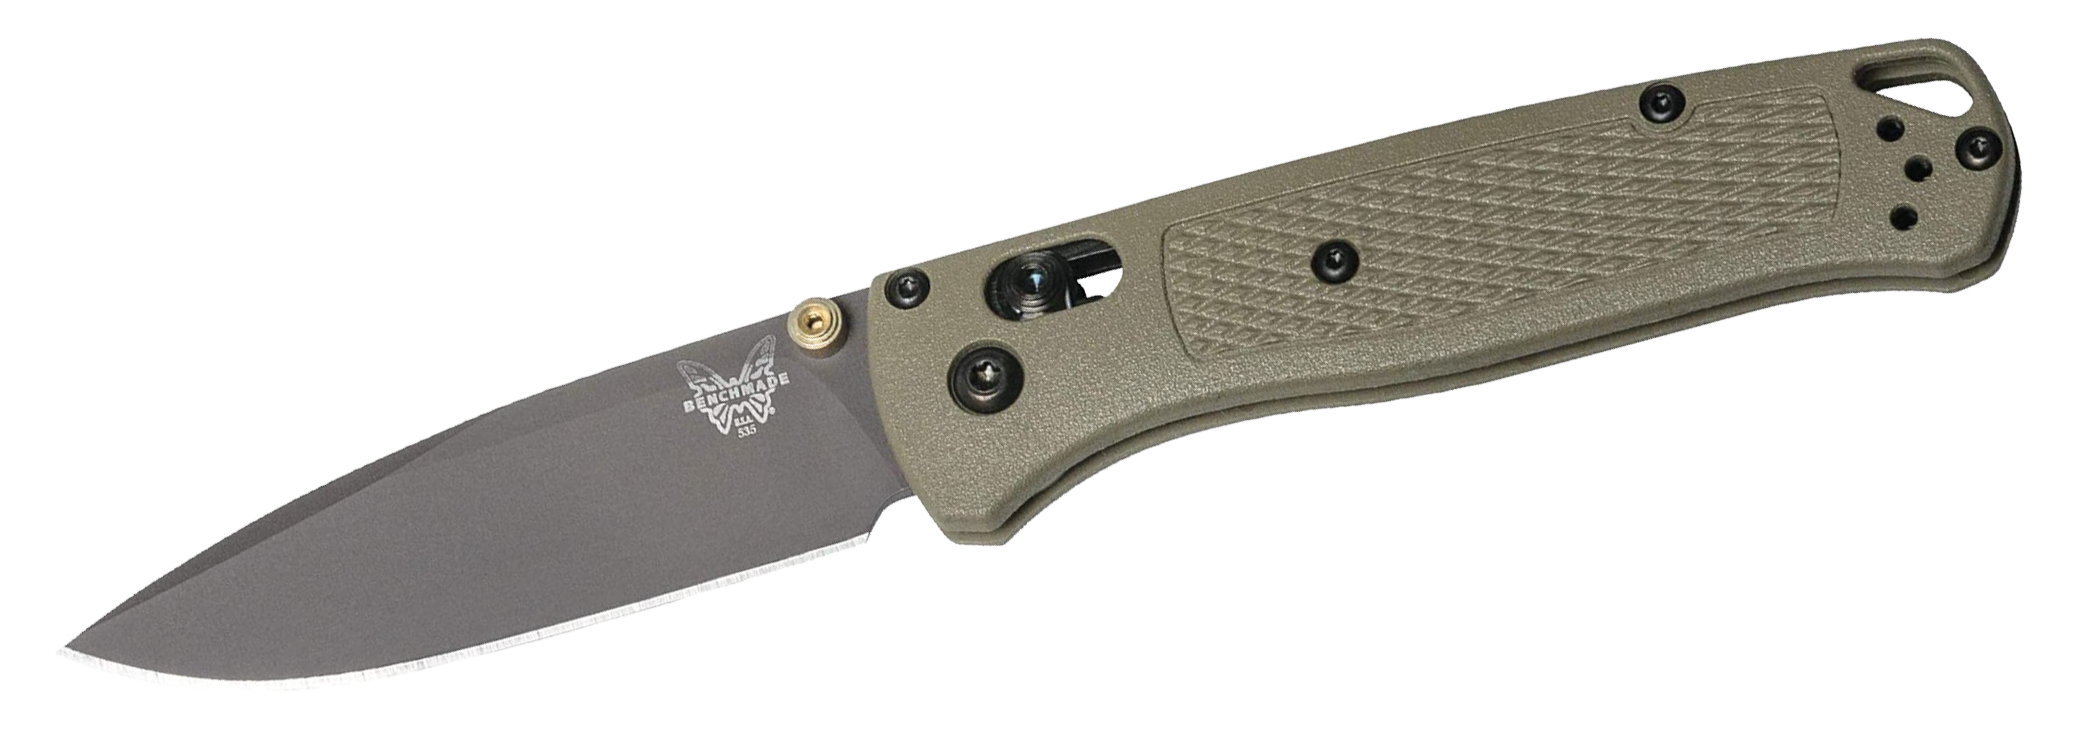 Benchmade Bugout 536 plain edge camping hunting knife